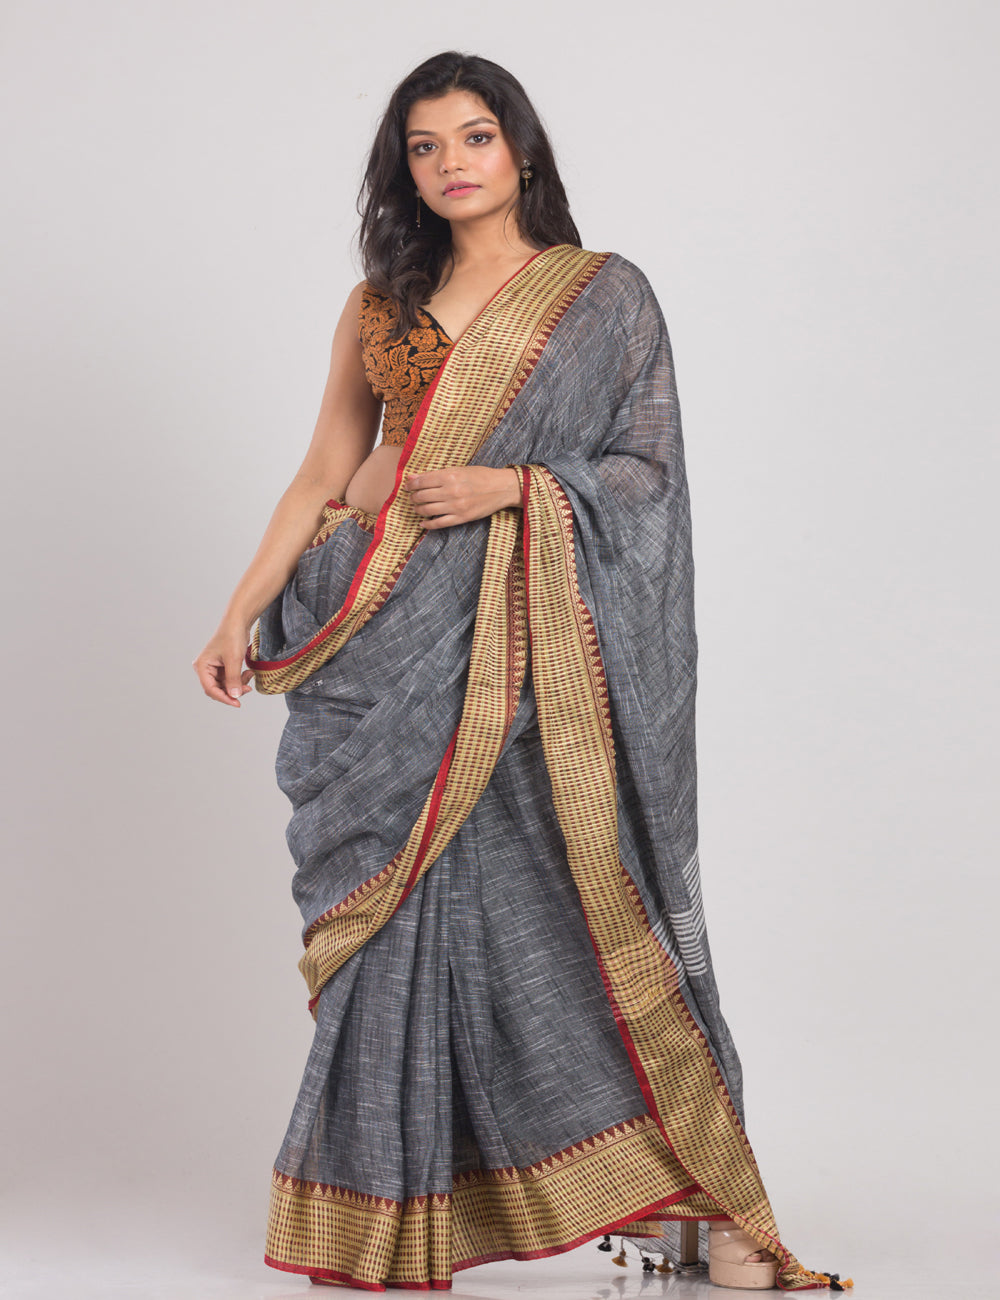 Grey with golden shimmer borders handwoven soft cotton sari